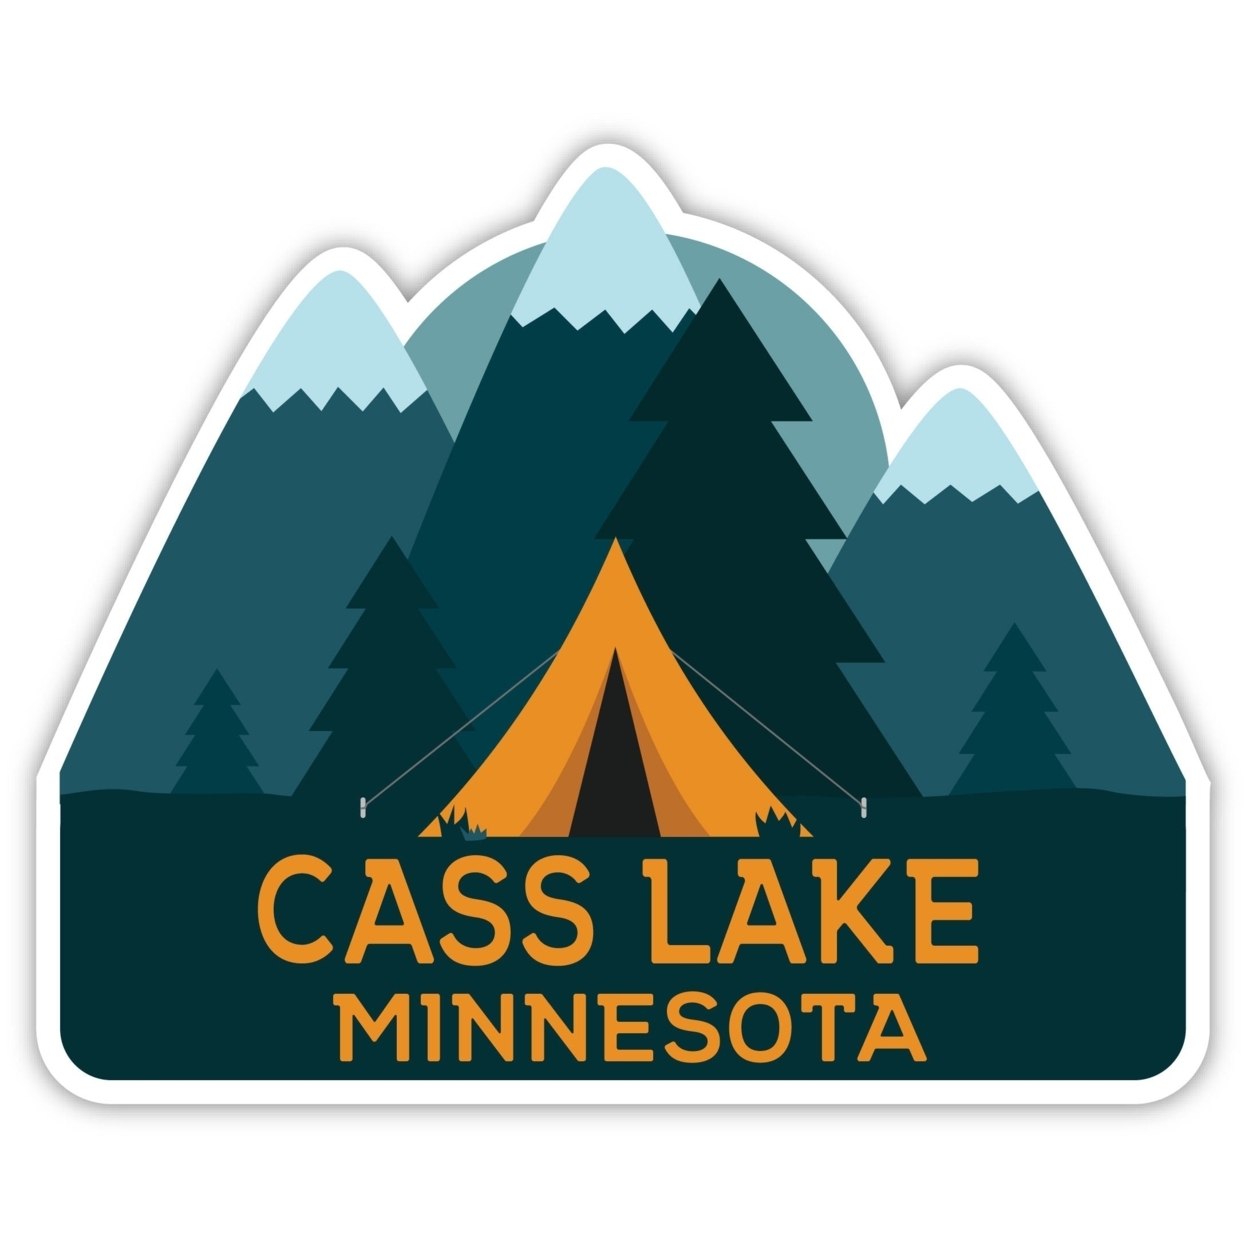 Cass Lake Minnesota Souvenir Decorative Stickers (Choose Theme And Size) - Single Unit, 12-Inch, Great Outdoors